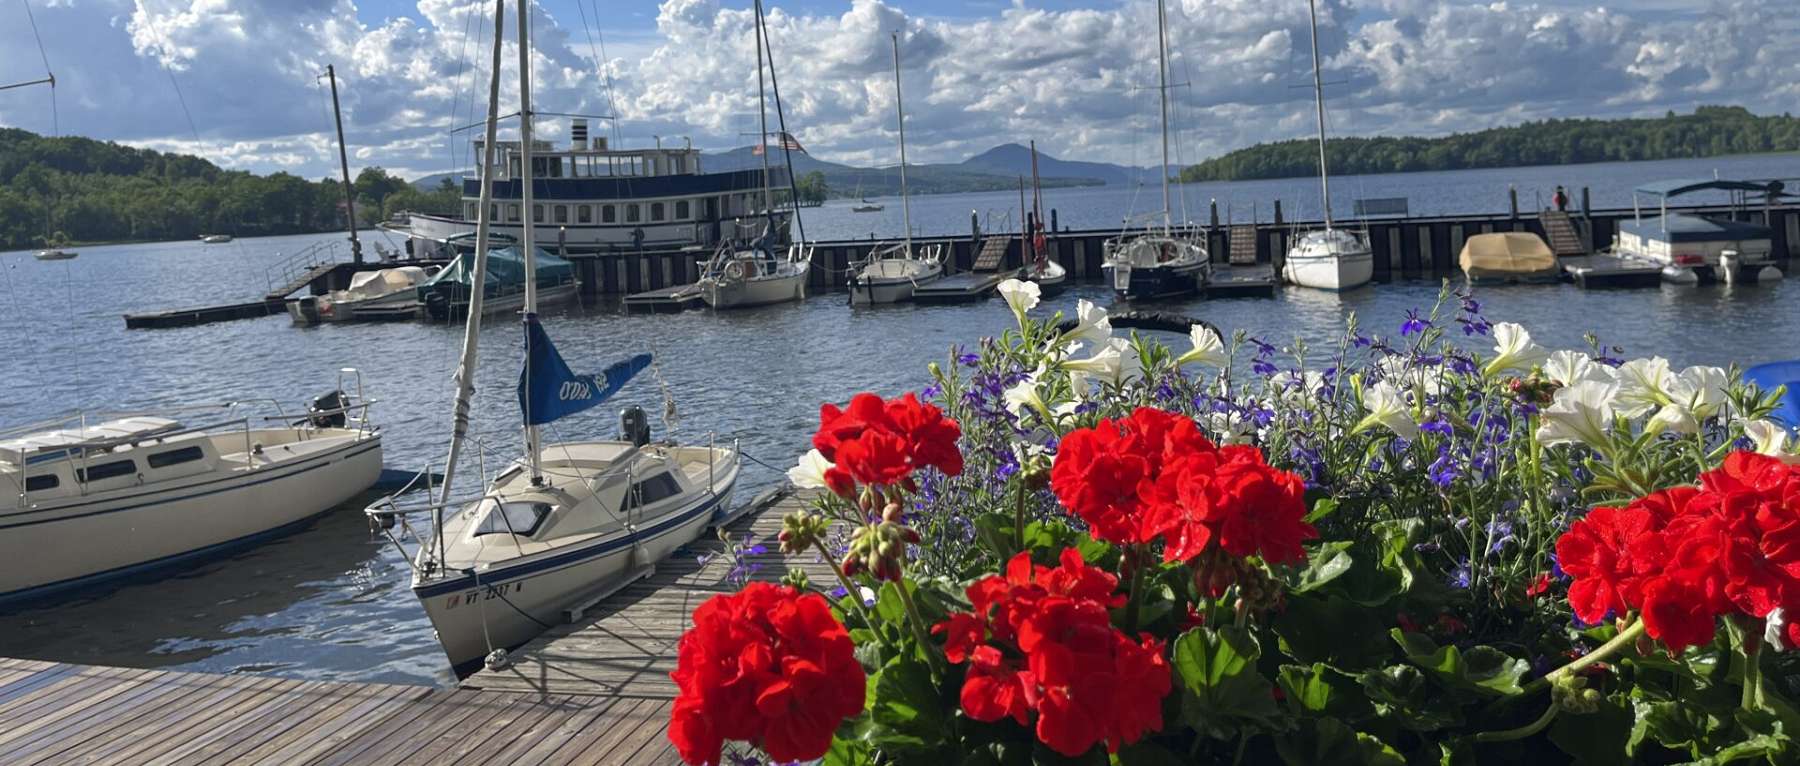 Boats & Flowers on Lake Champlain Vermont - Photo Credit Northern Forest Center